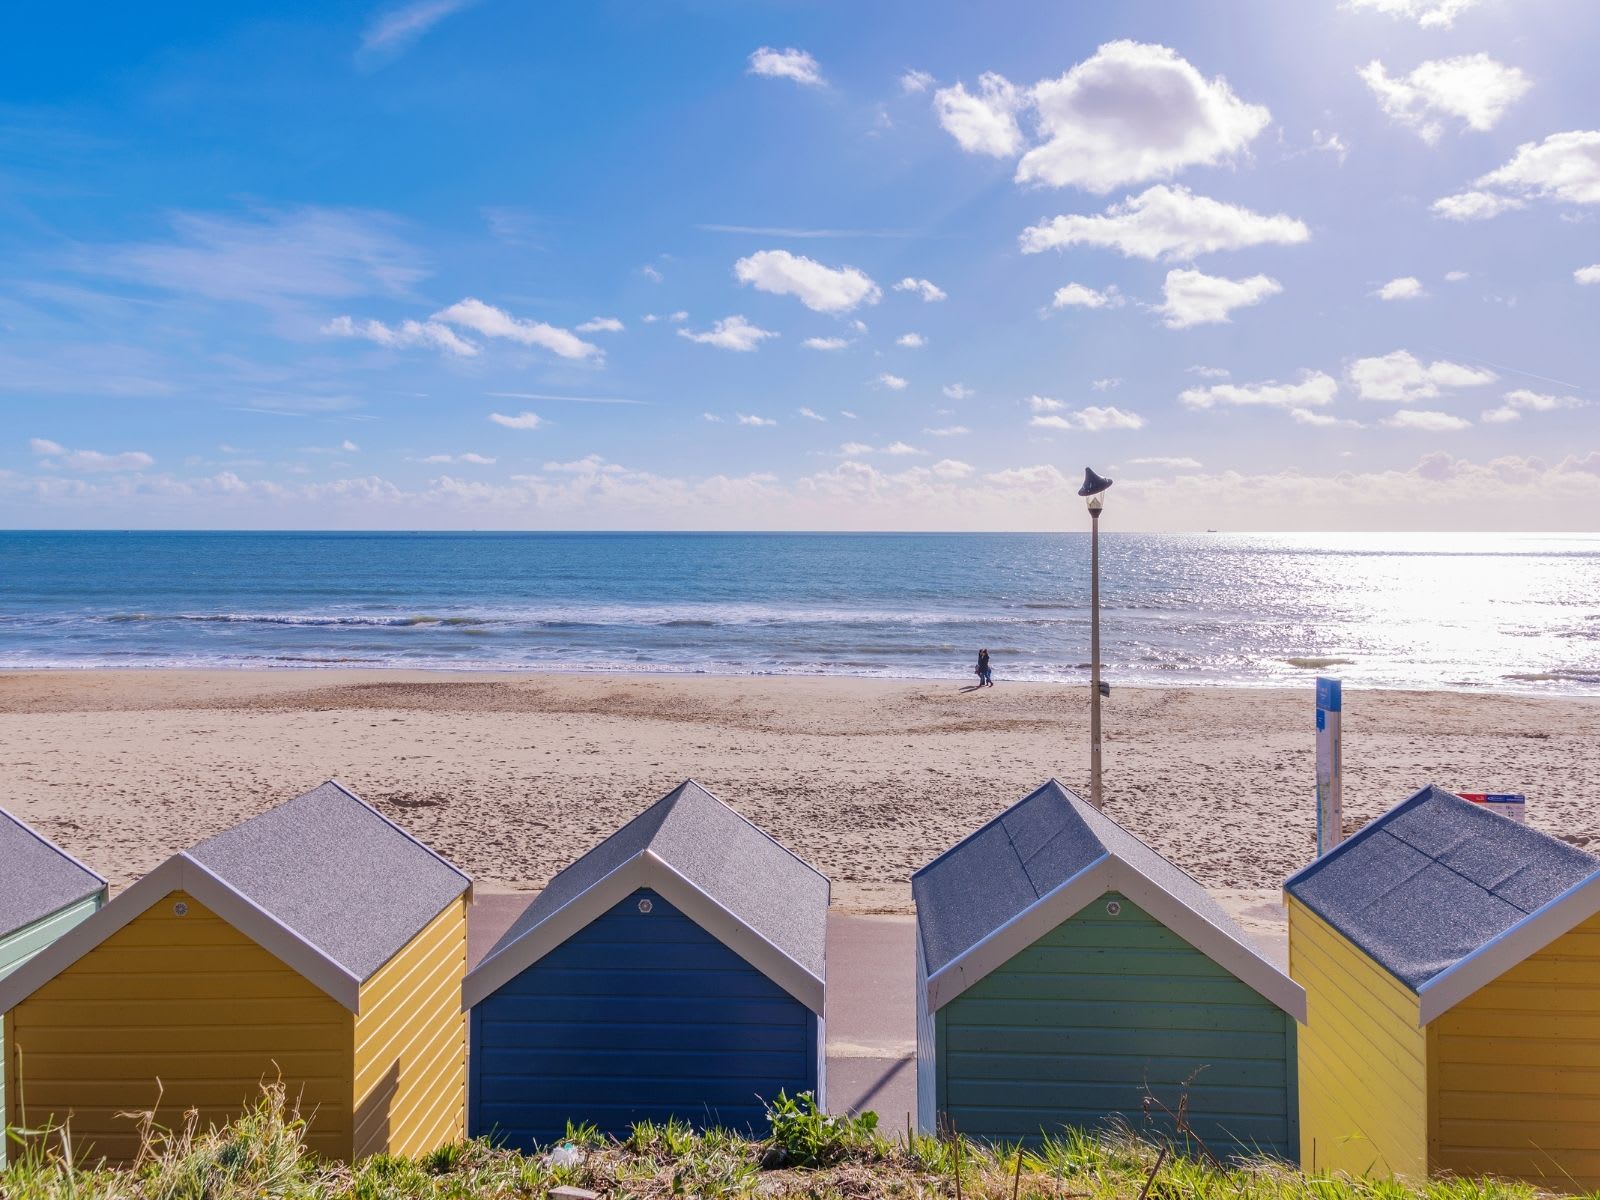 Bournemouth beach huts and sea view